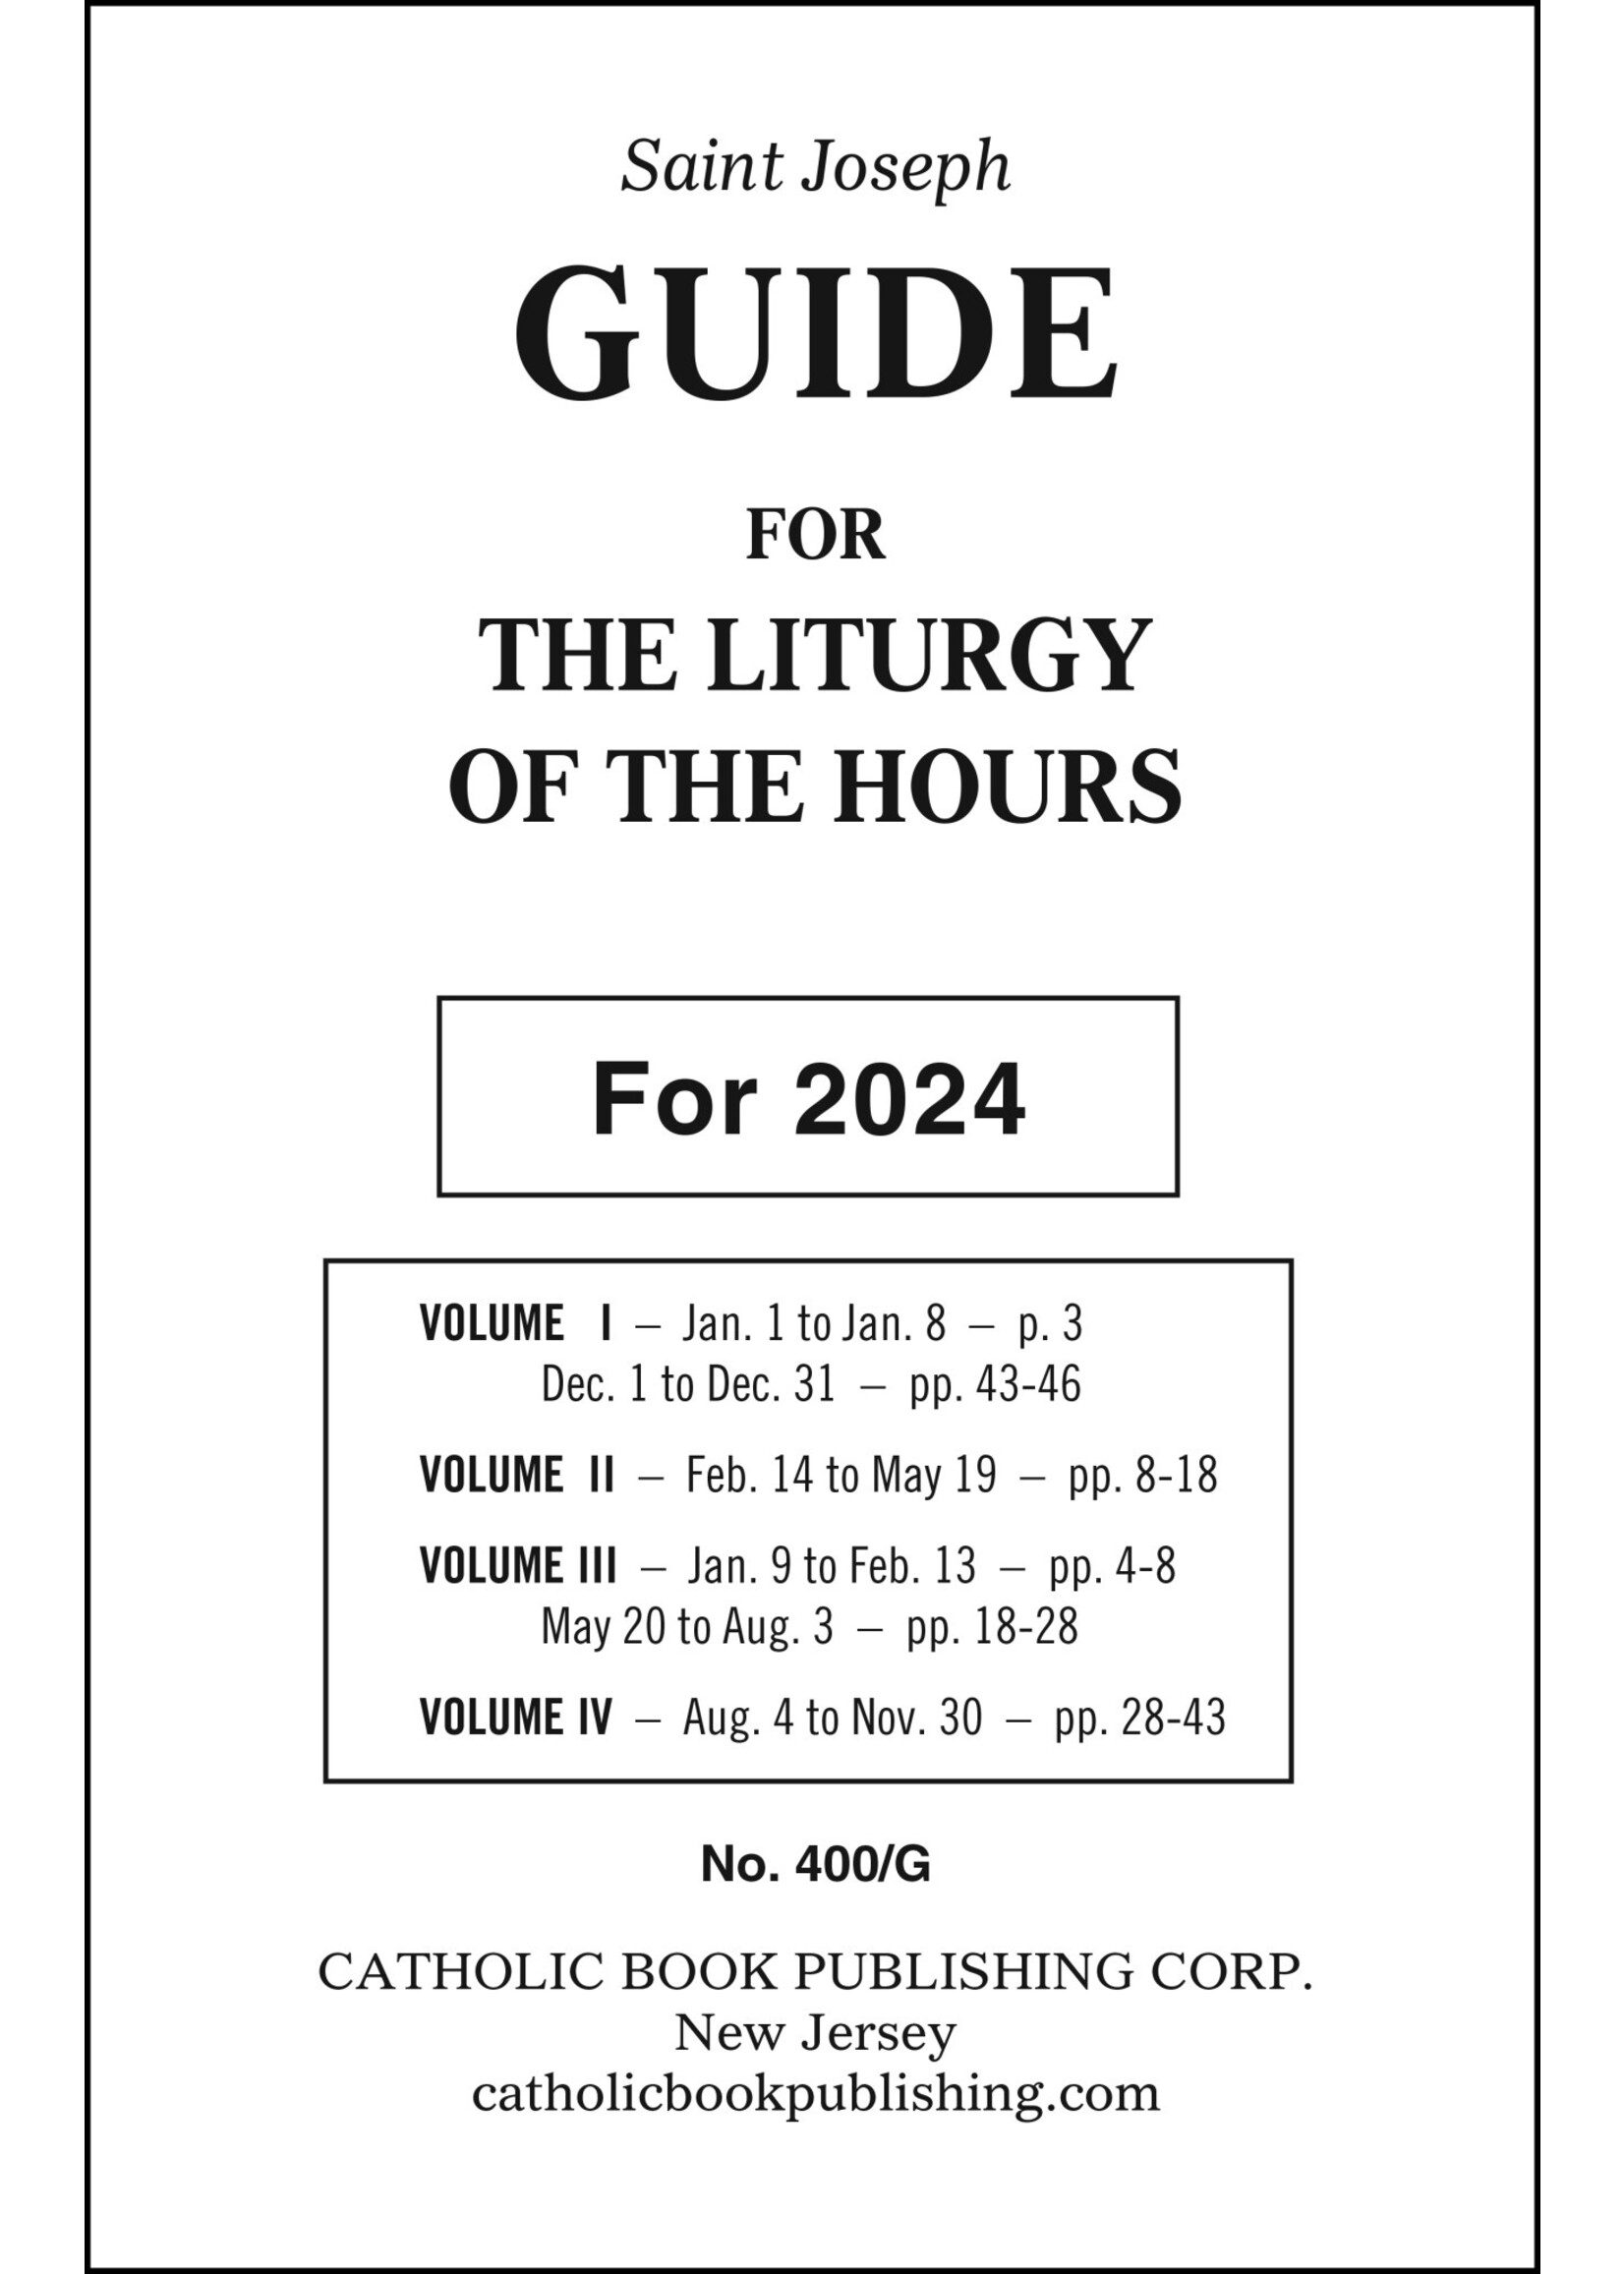 2024 Liturgy of the Hours Guide